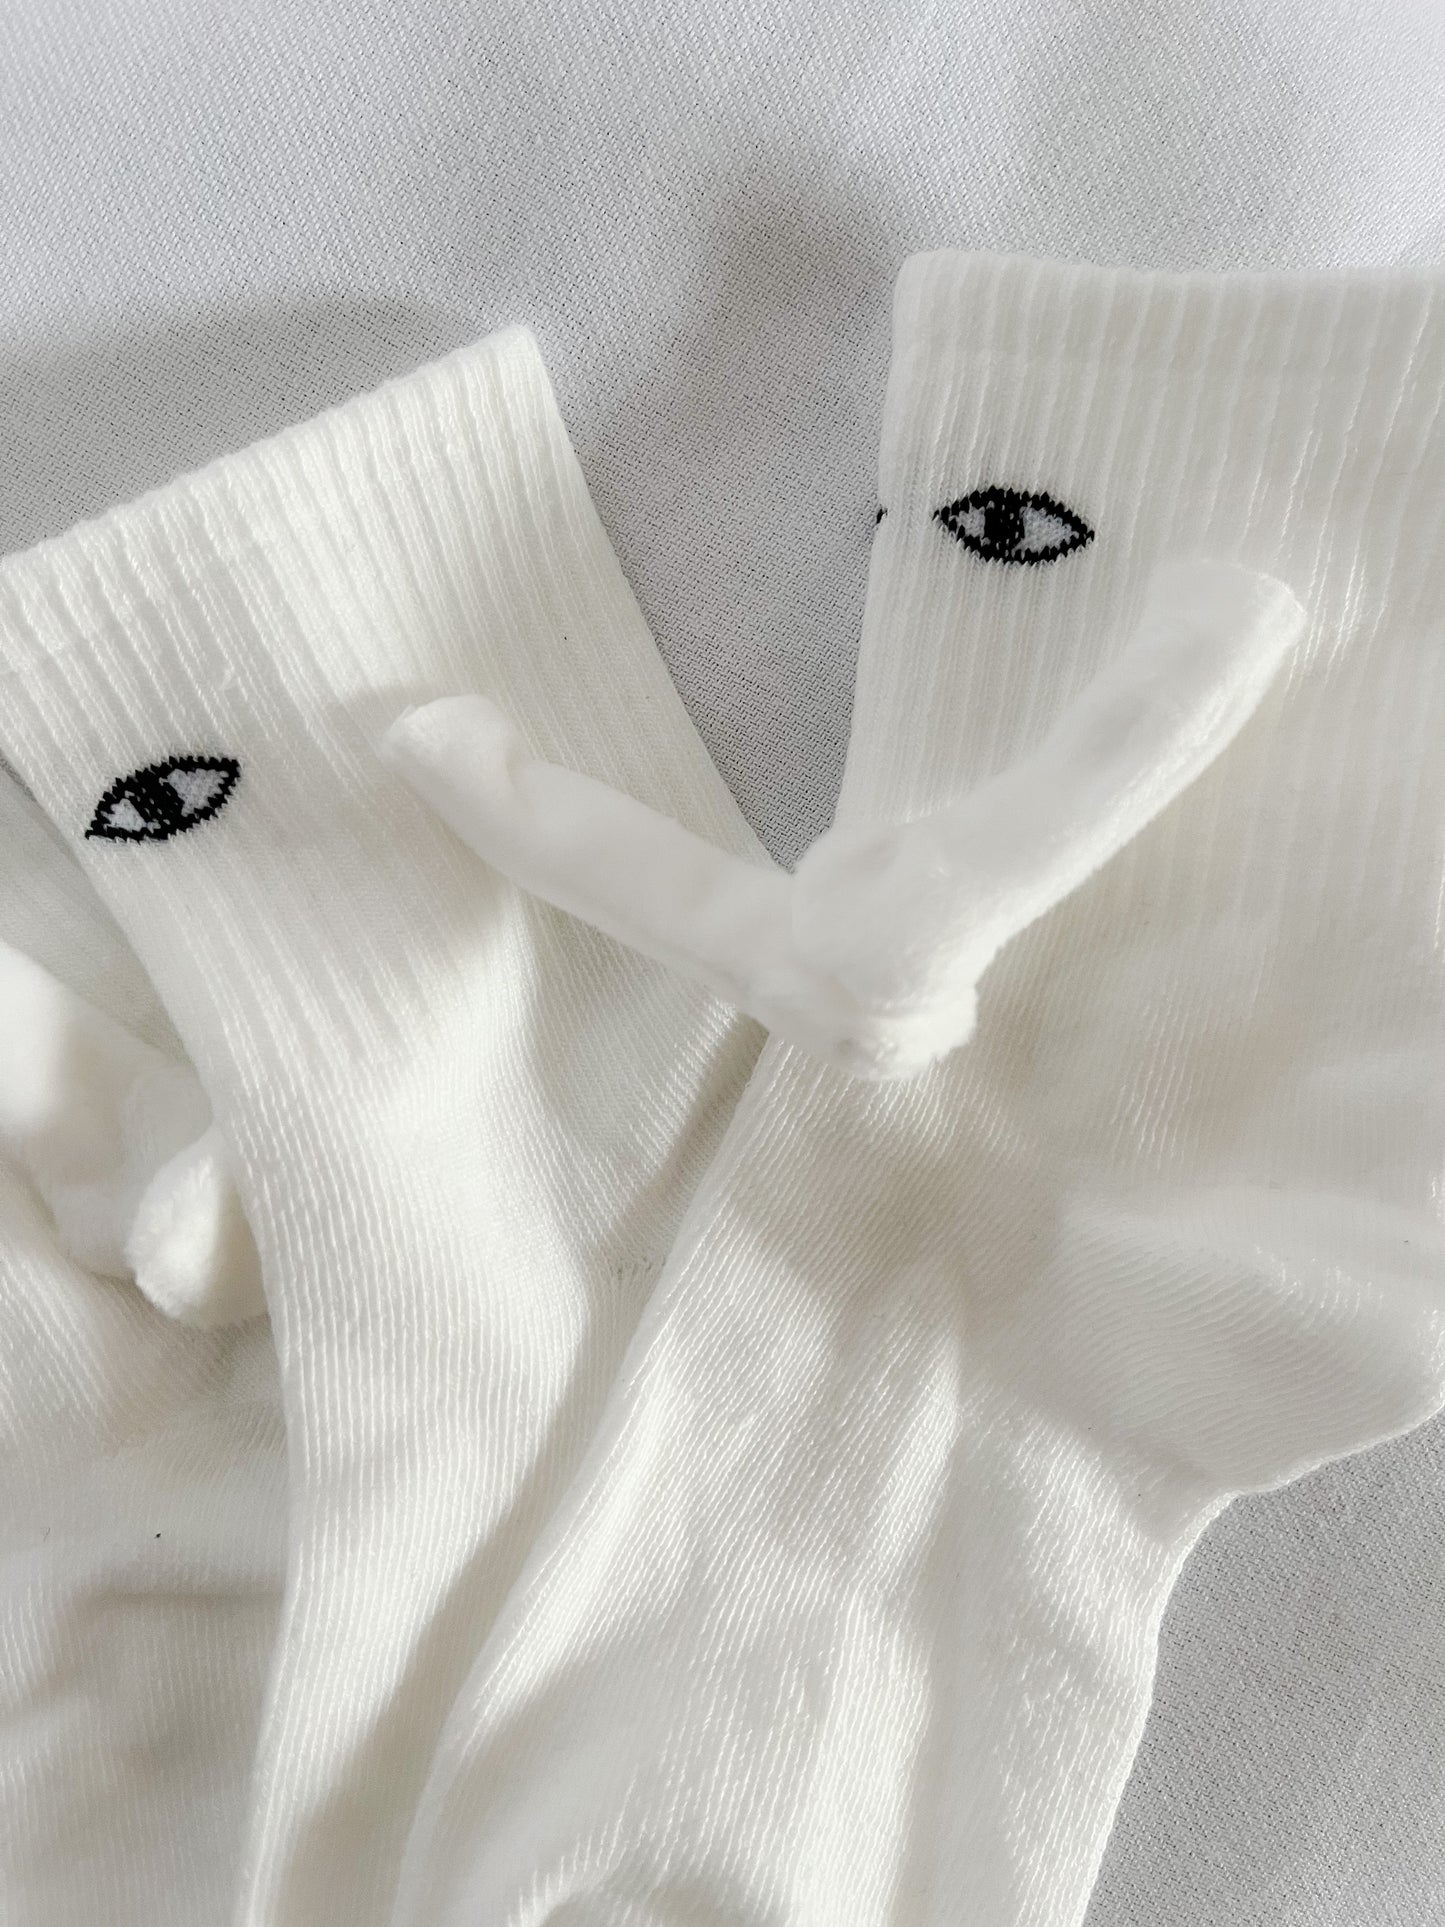 Eyes Without A Face Sock